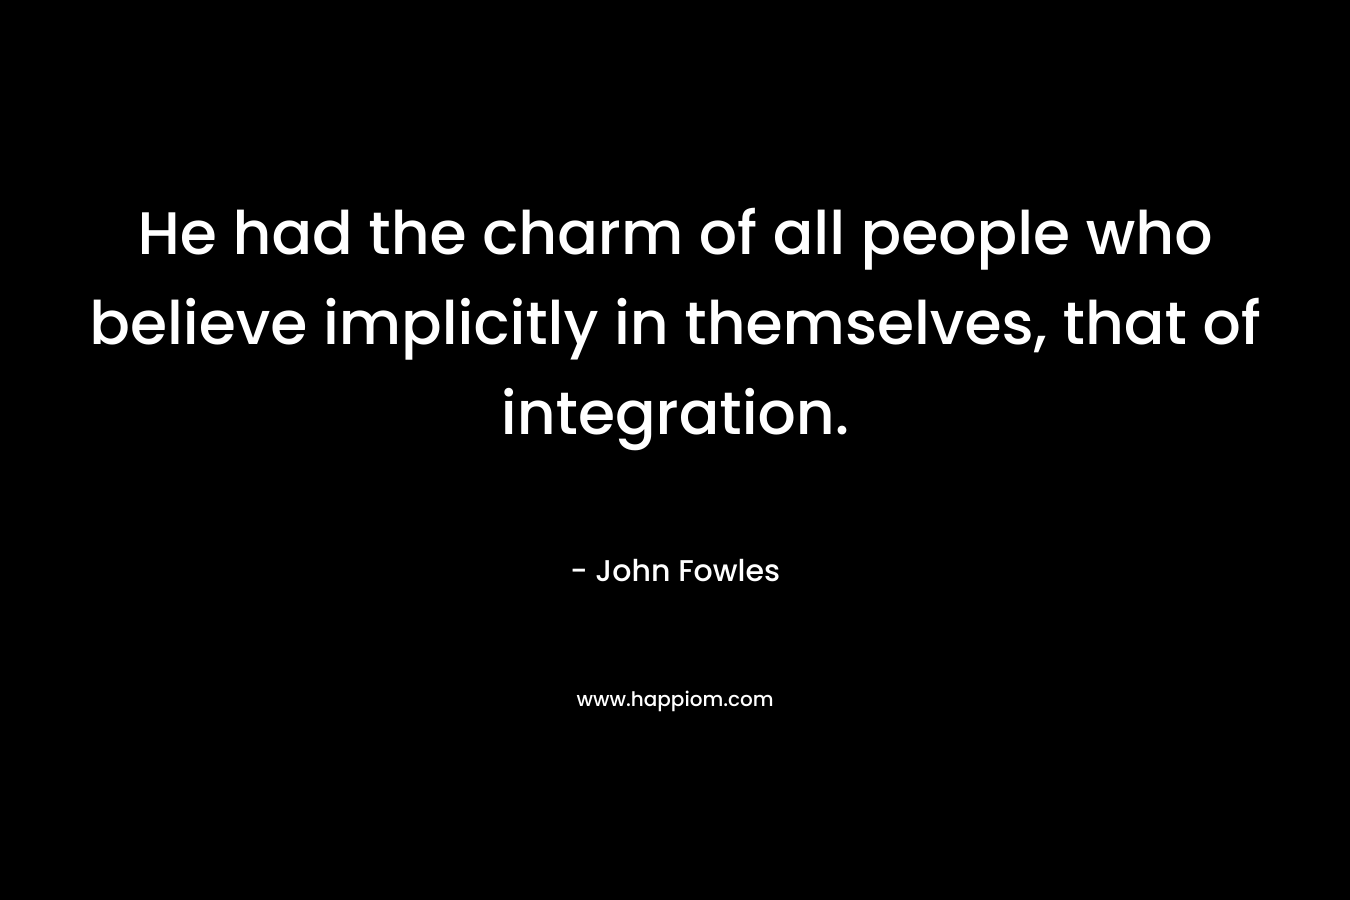 He had the charm of all people who believe implicitly in themselves, that of integration.